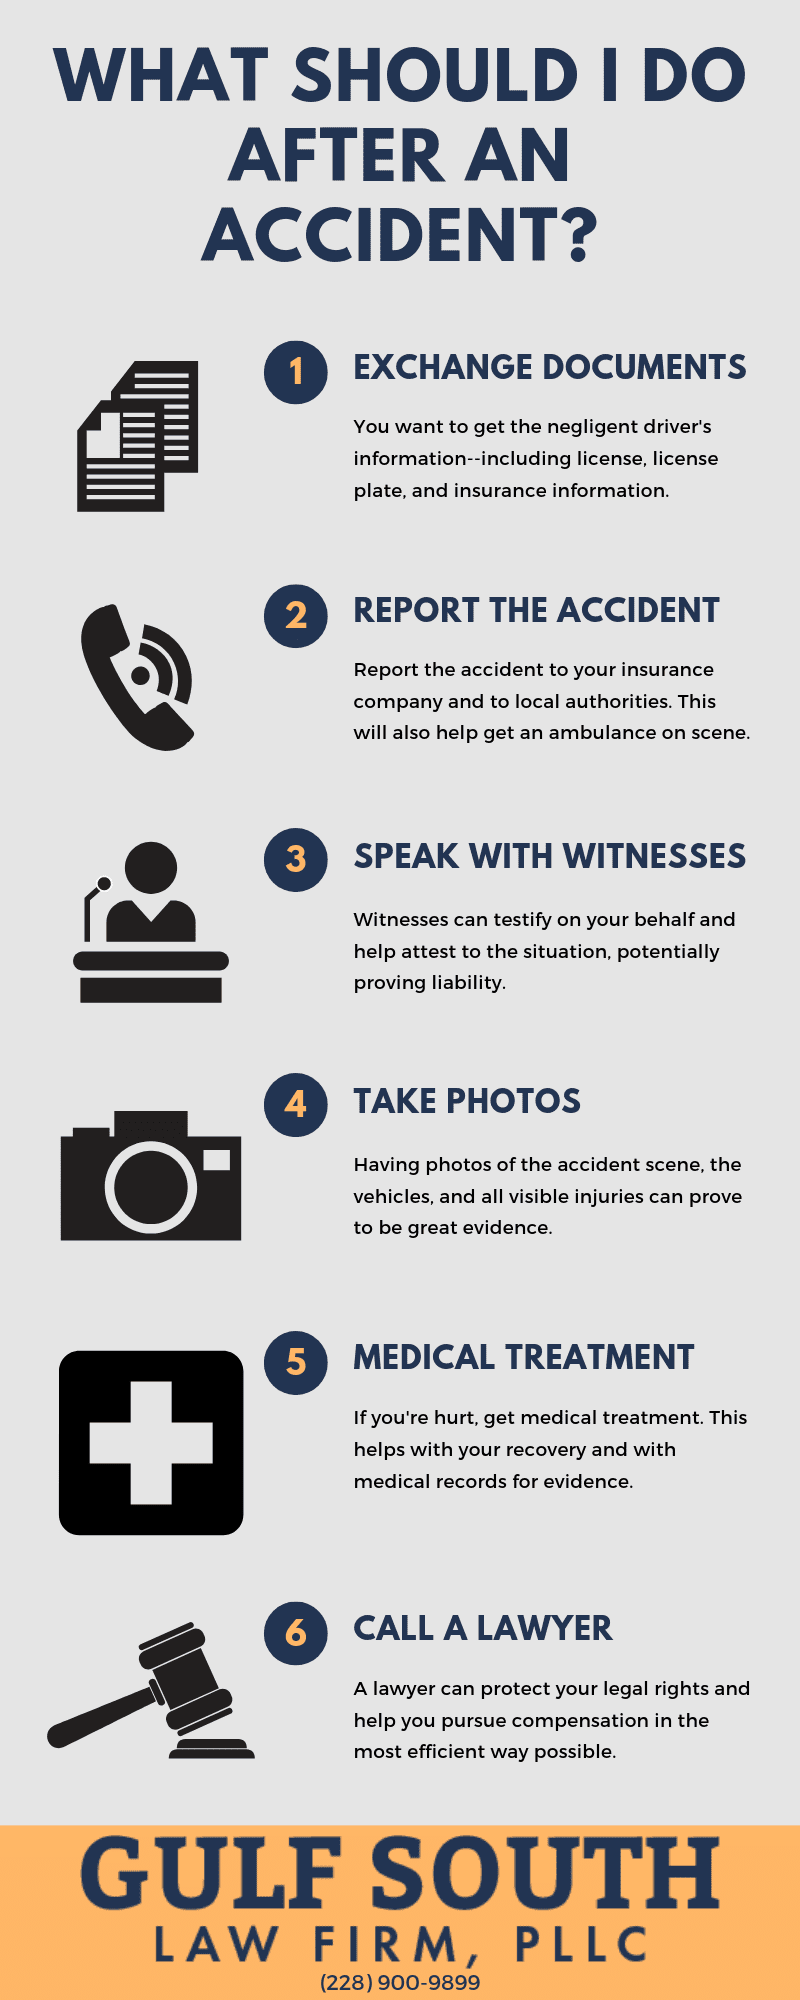 what you should do after a car accident: exchange documents, report the accident, speak with witnesses, take photos, get medical treatment, call a lawyer